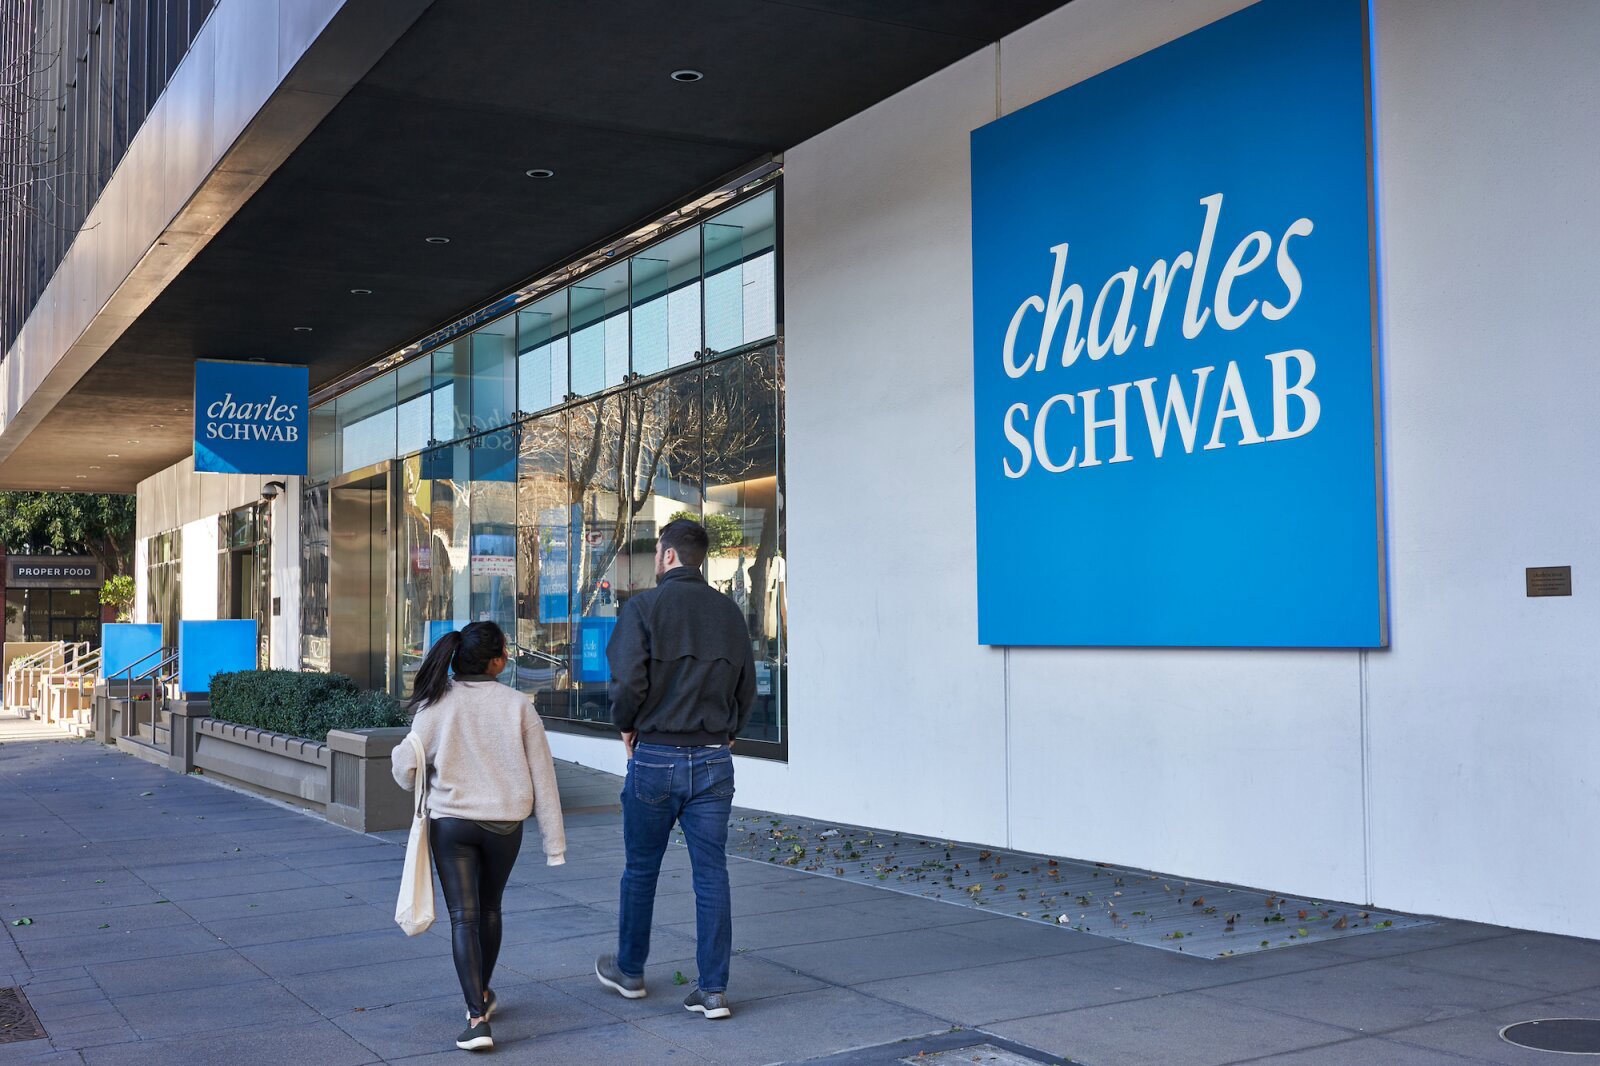 7 of the Best Charles Schwab Mutual Funds